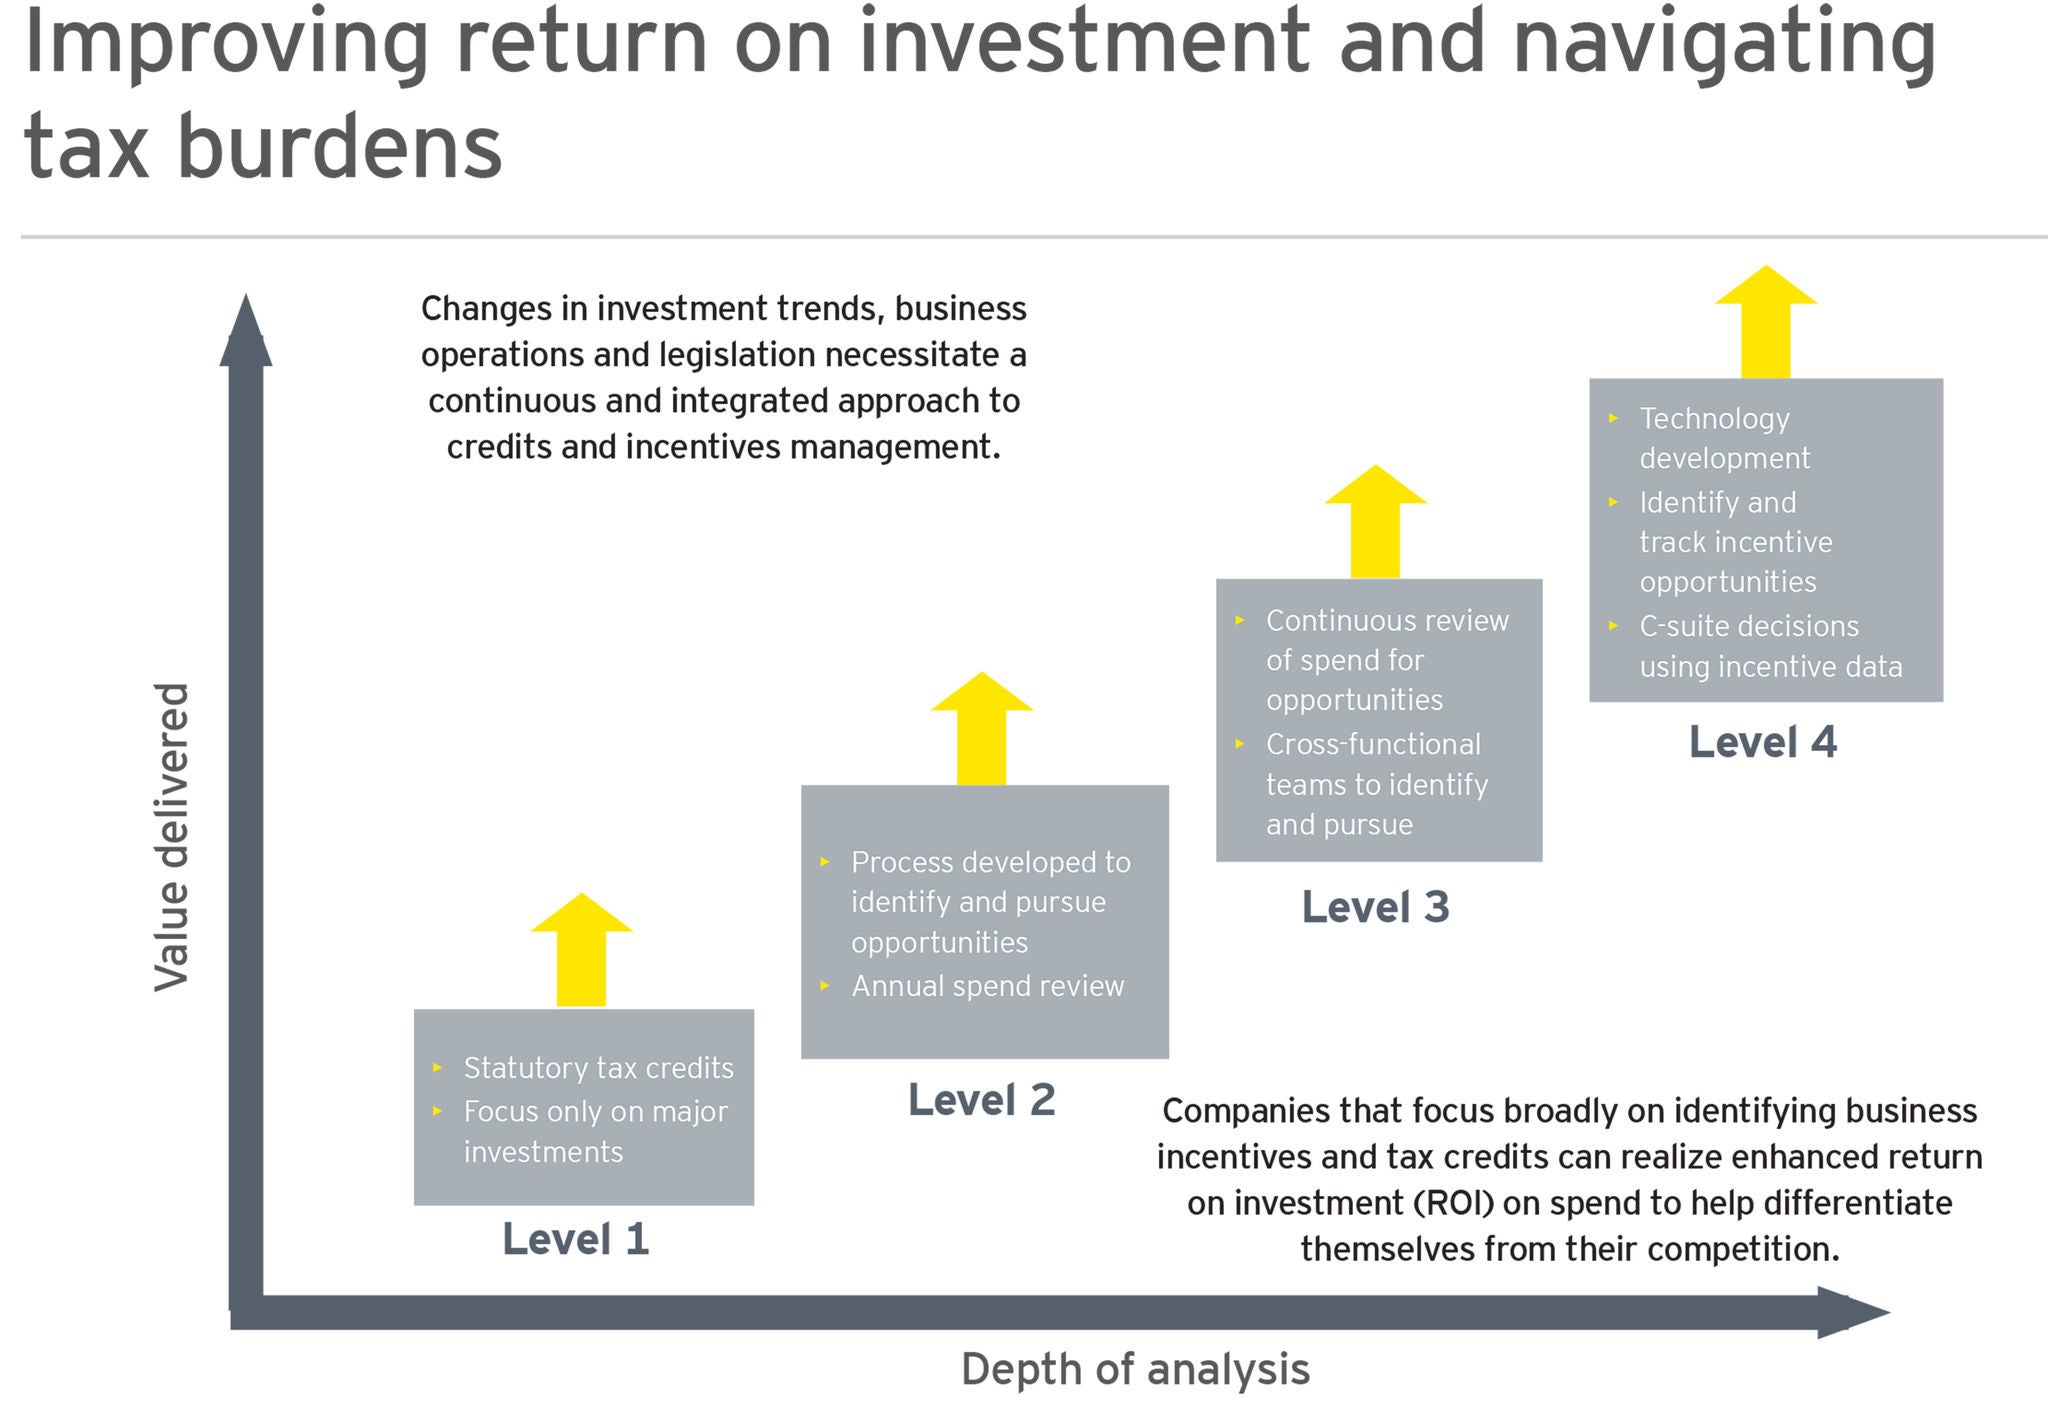 Improving return on investment and navigating tax burdens
